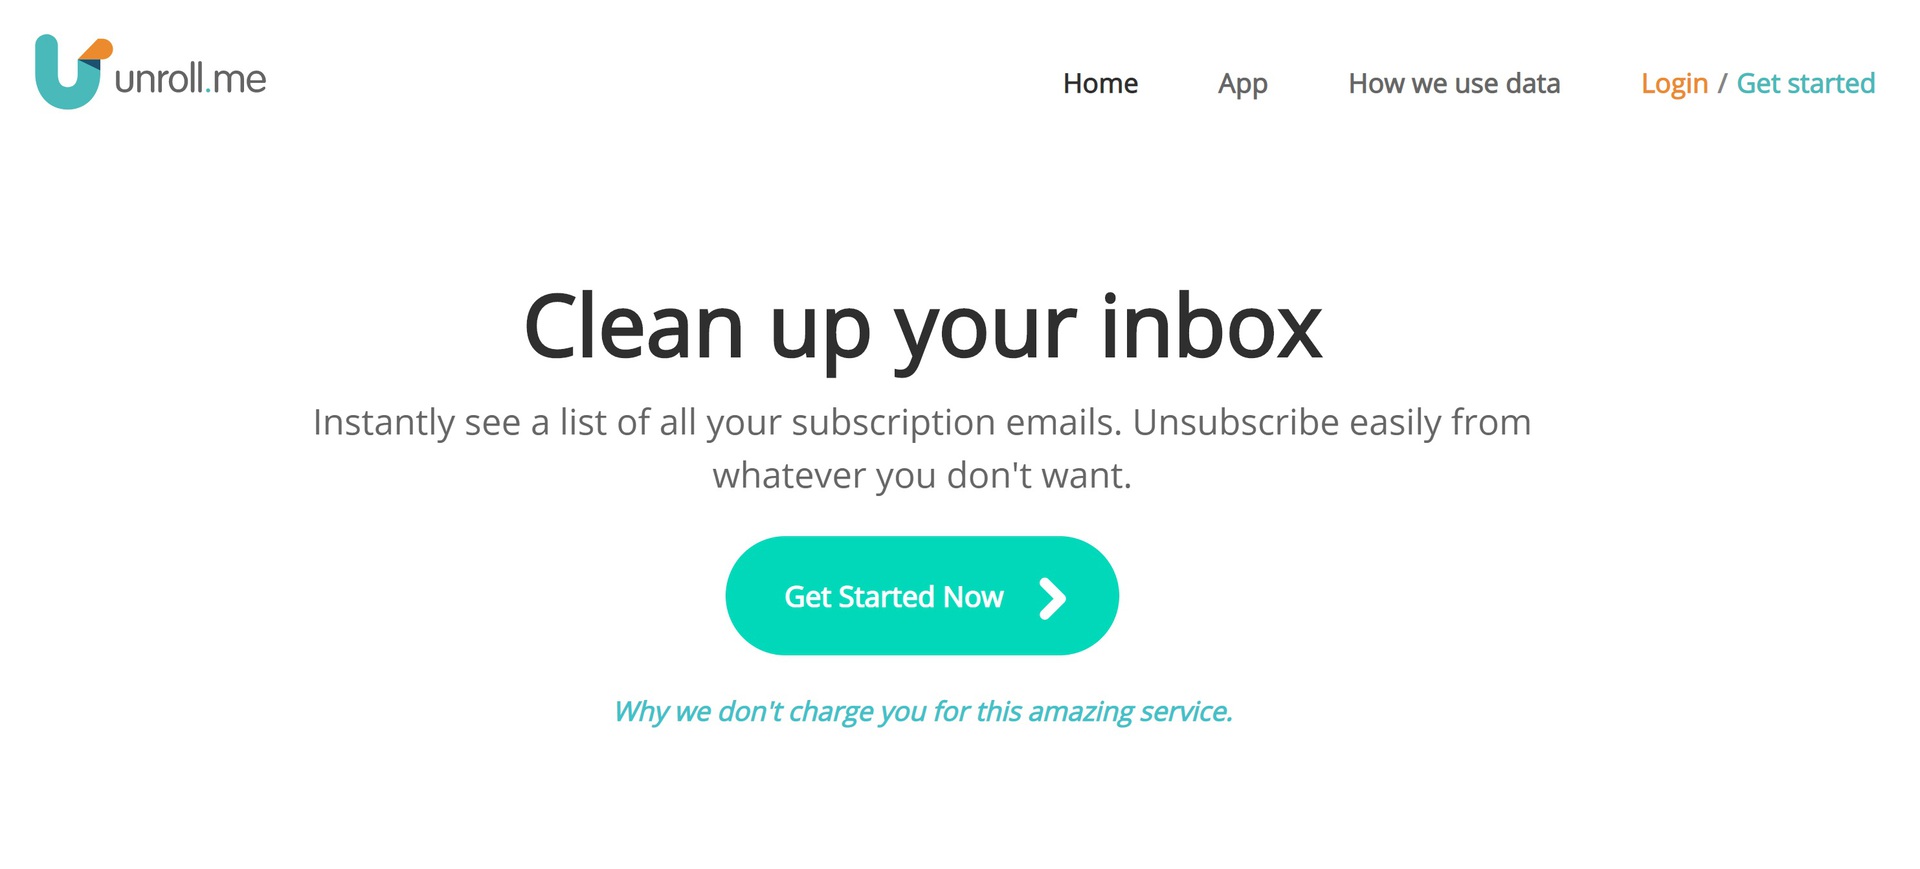 Unroll Me email subscription removal tool to delete yourself fromt the internet